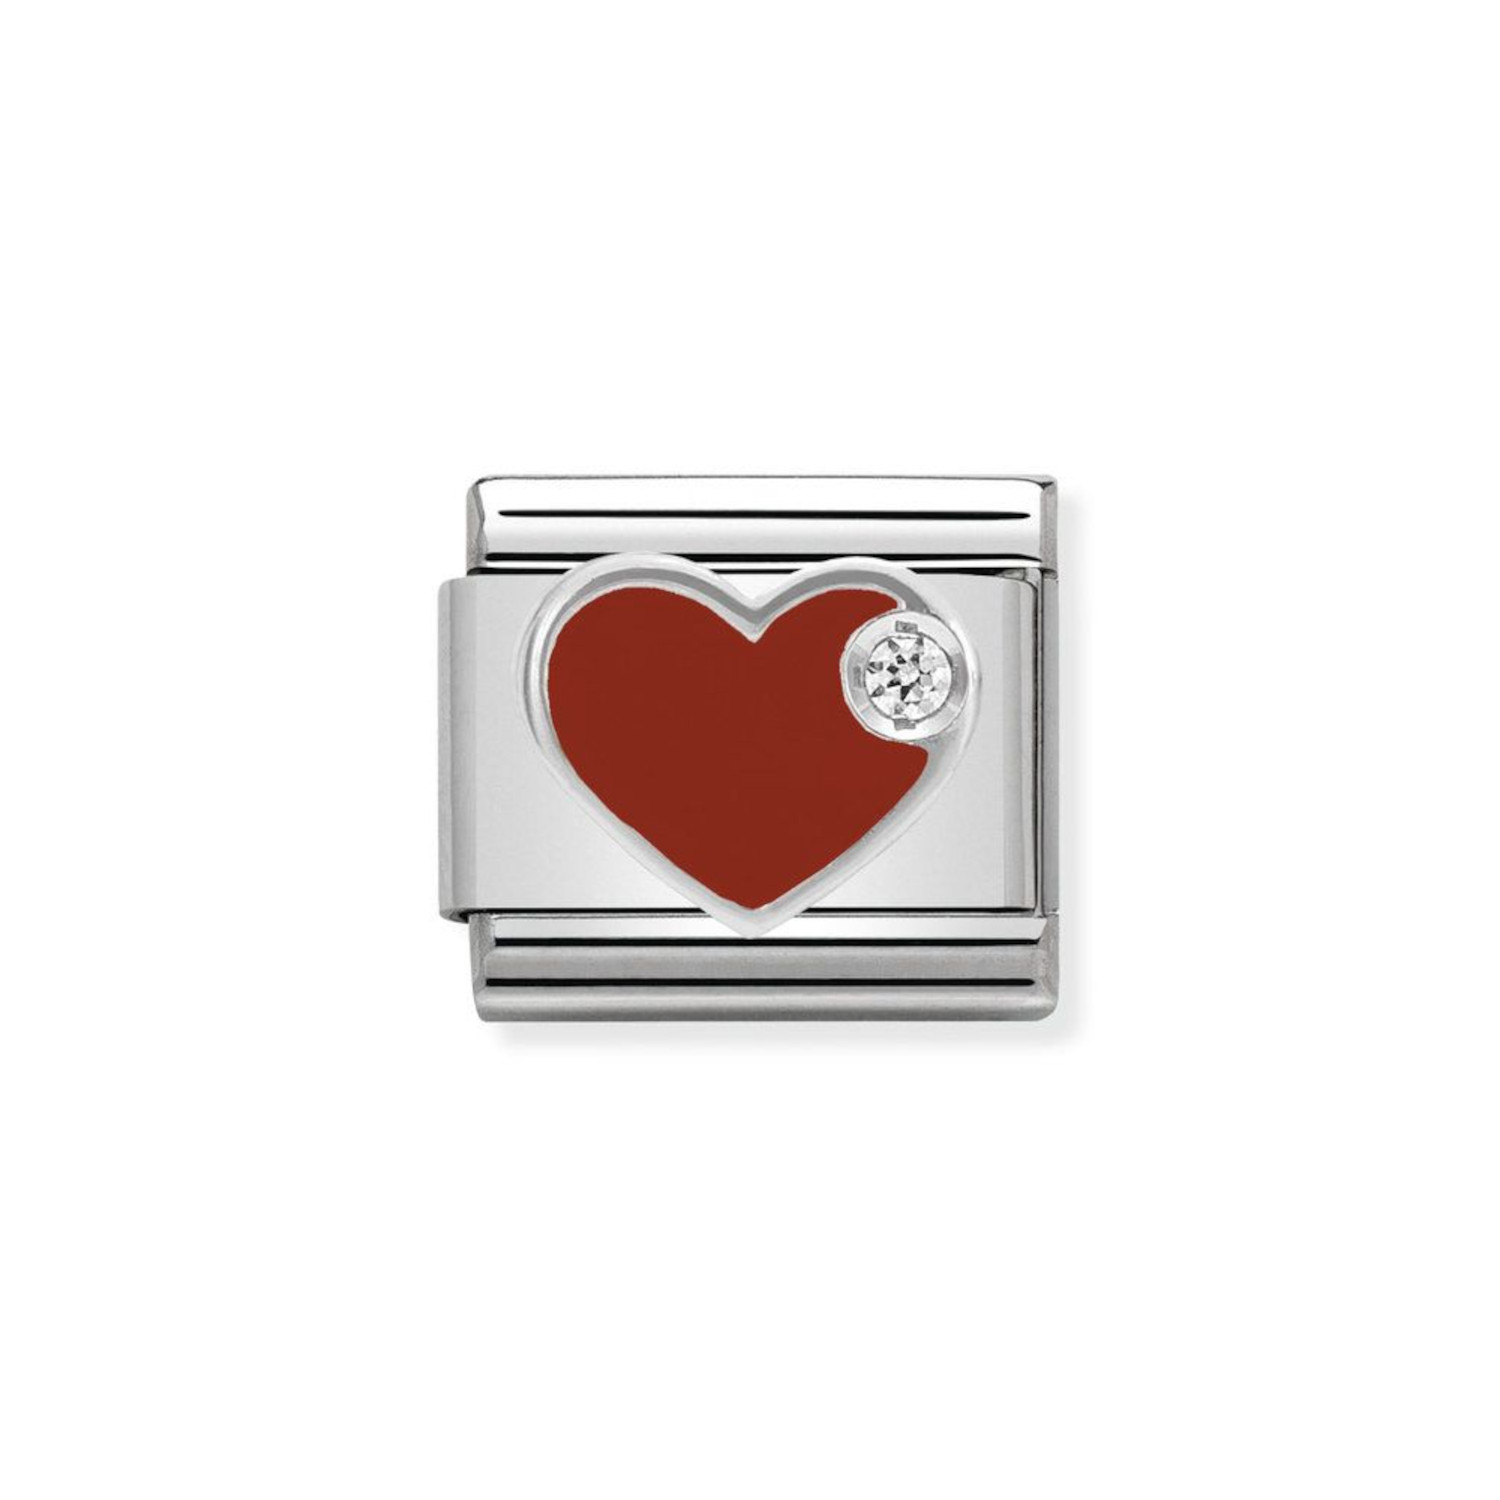 NOMINATION COMPOSABLE CLASSIC LINK RED HEART IN STERLING SILVER WITH ENAMEL 330305/01